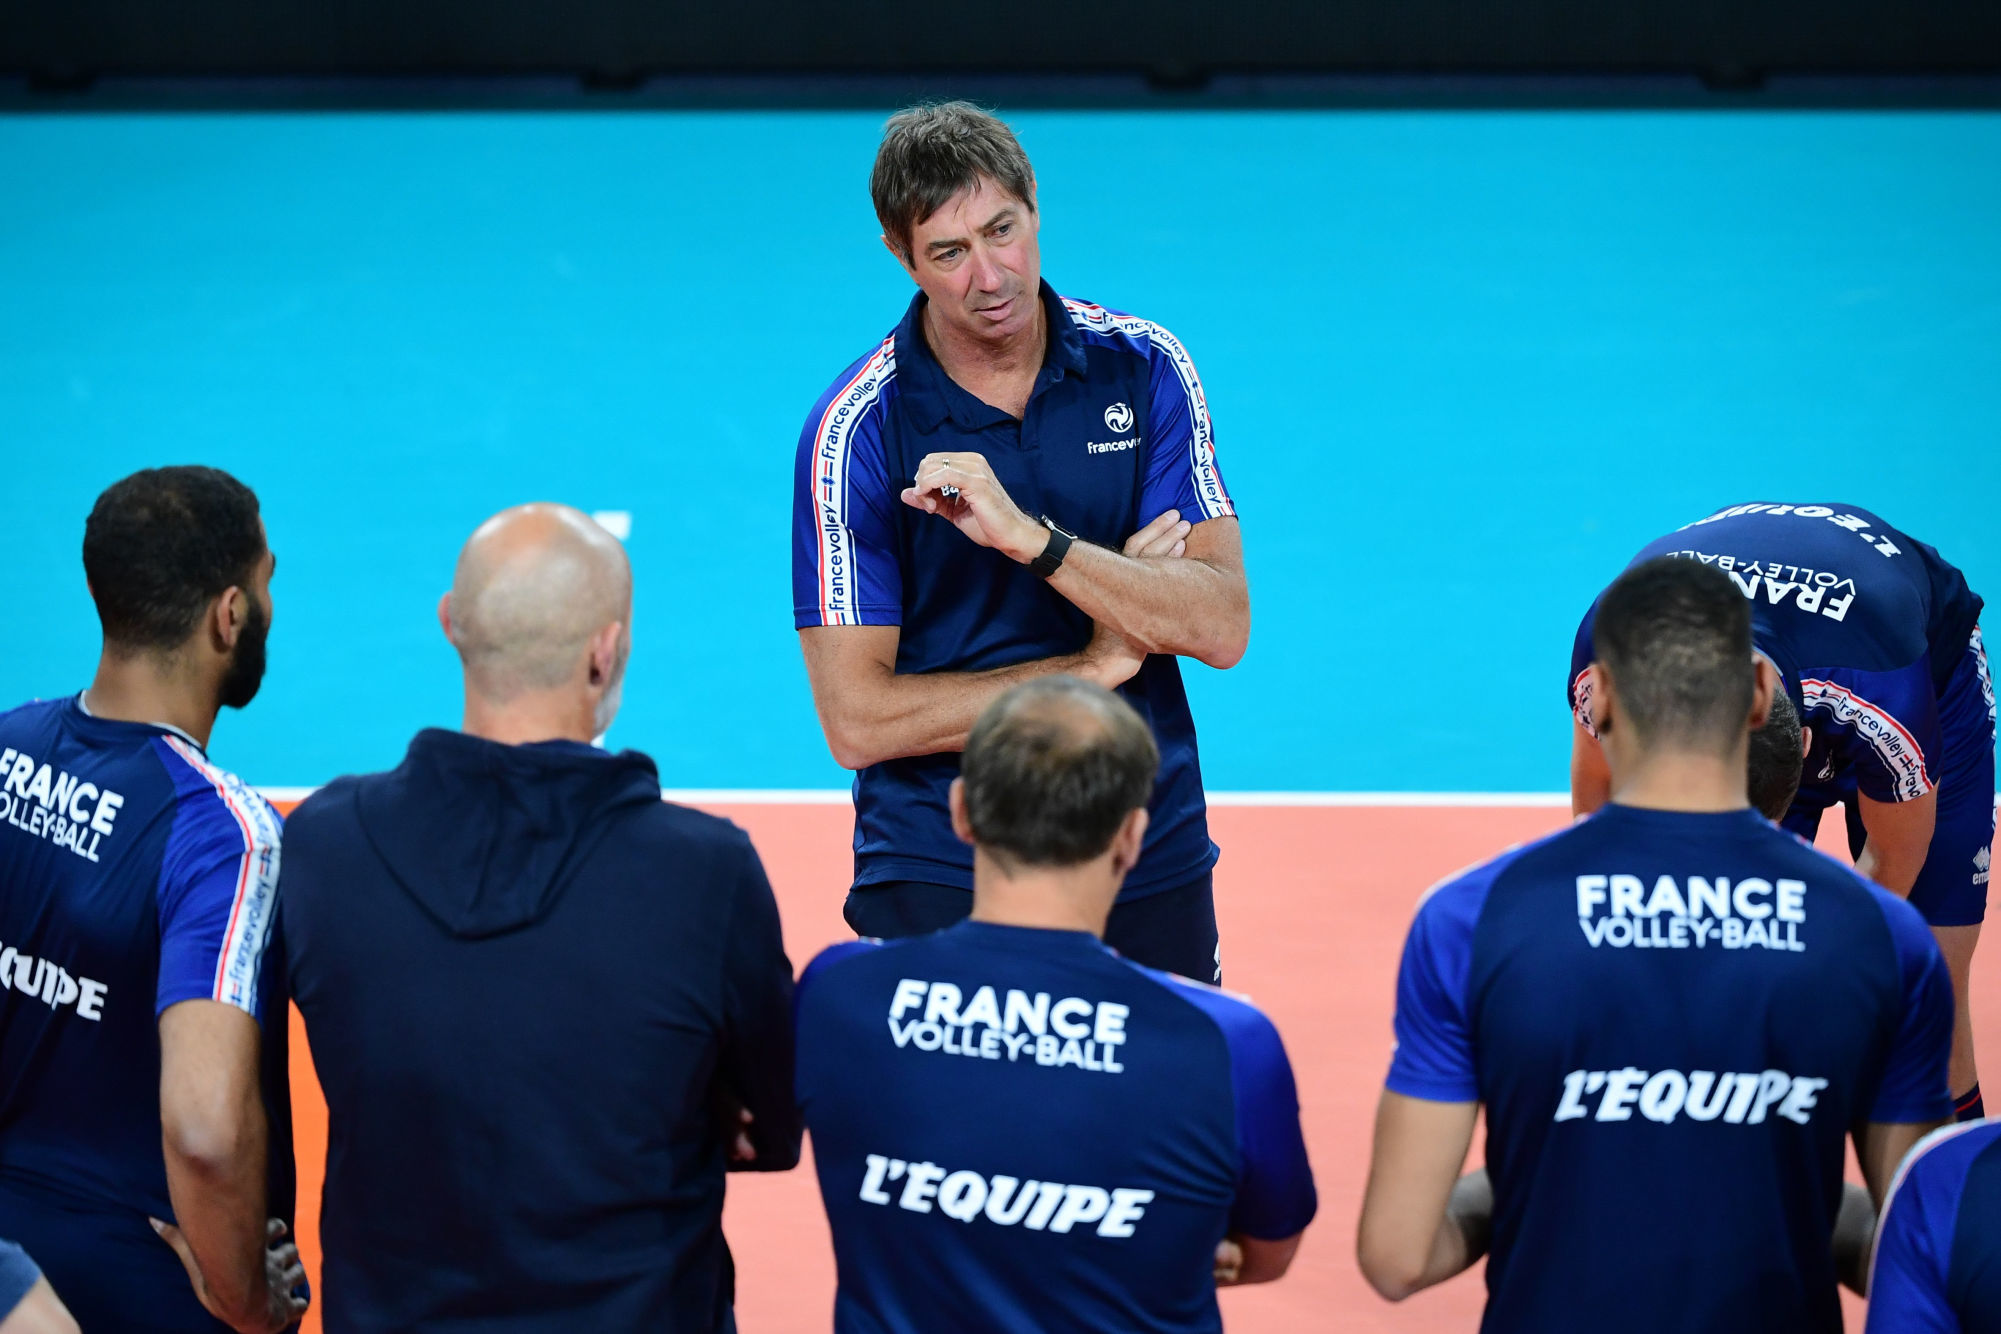 France coach Laurent Tillie during the France volleyball team Media Day on September 5, 2019 in Paris, France. (Photo by Dave Winter/Icon Sport) - Laurent TILLIE